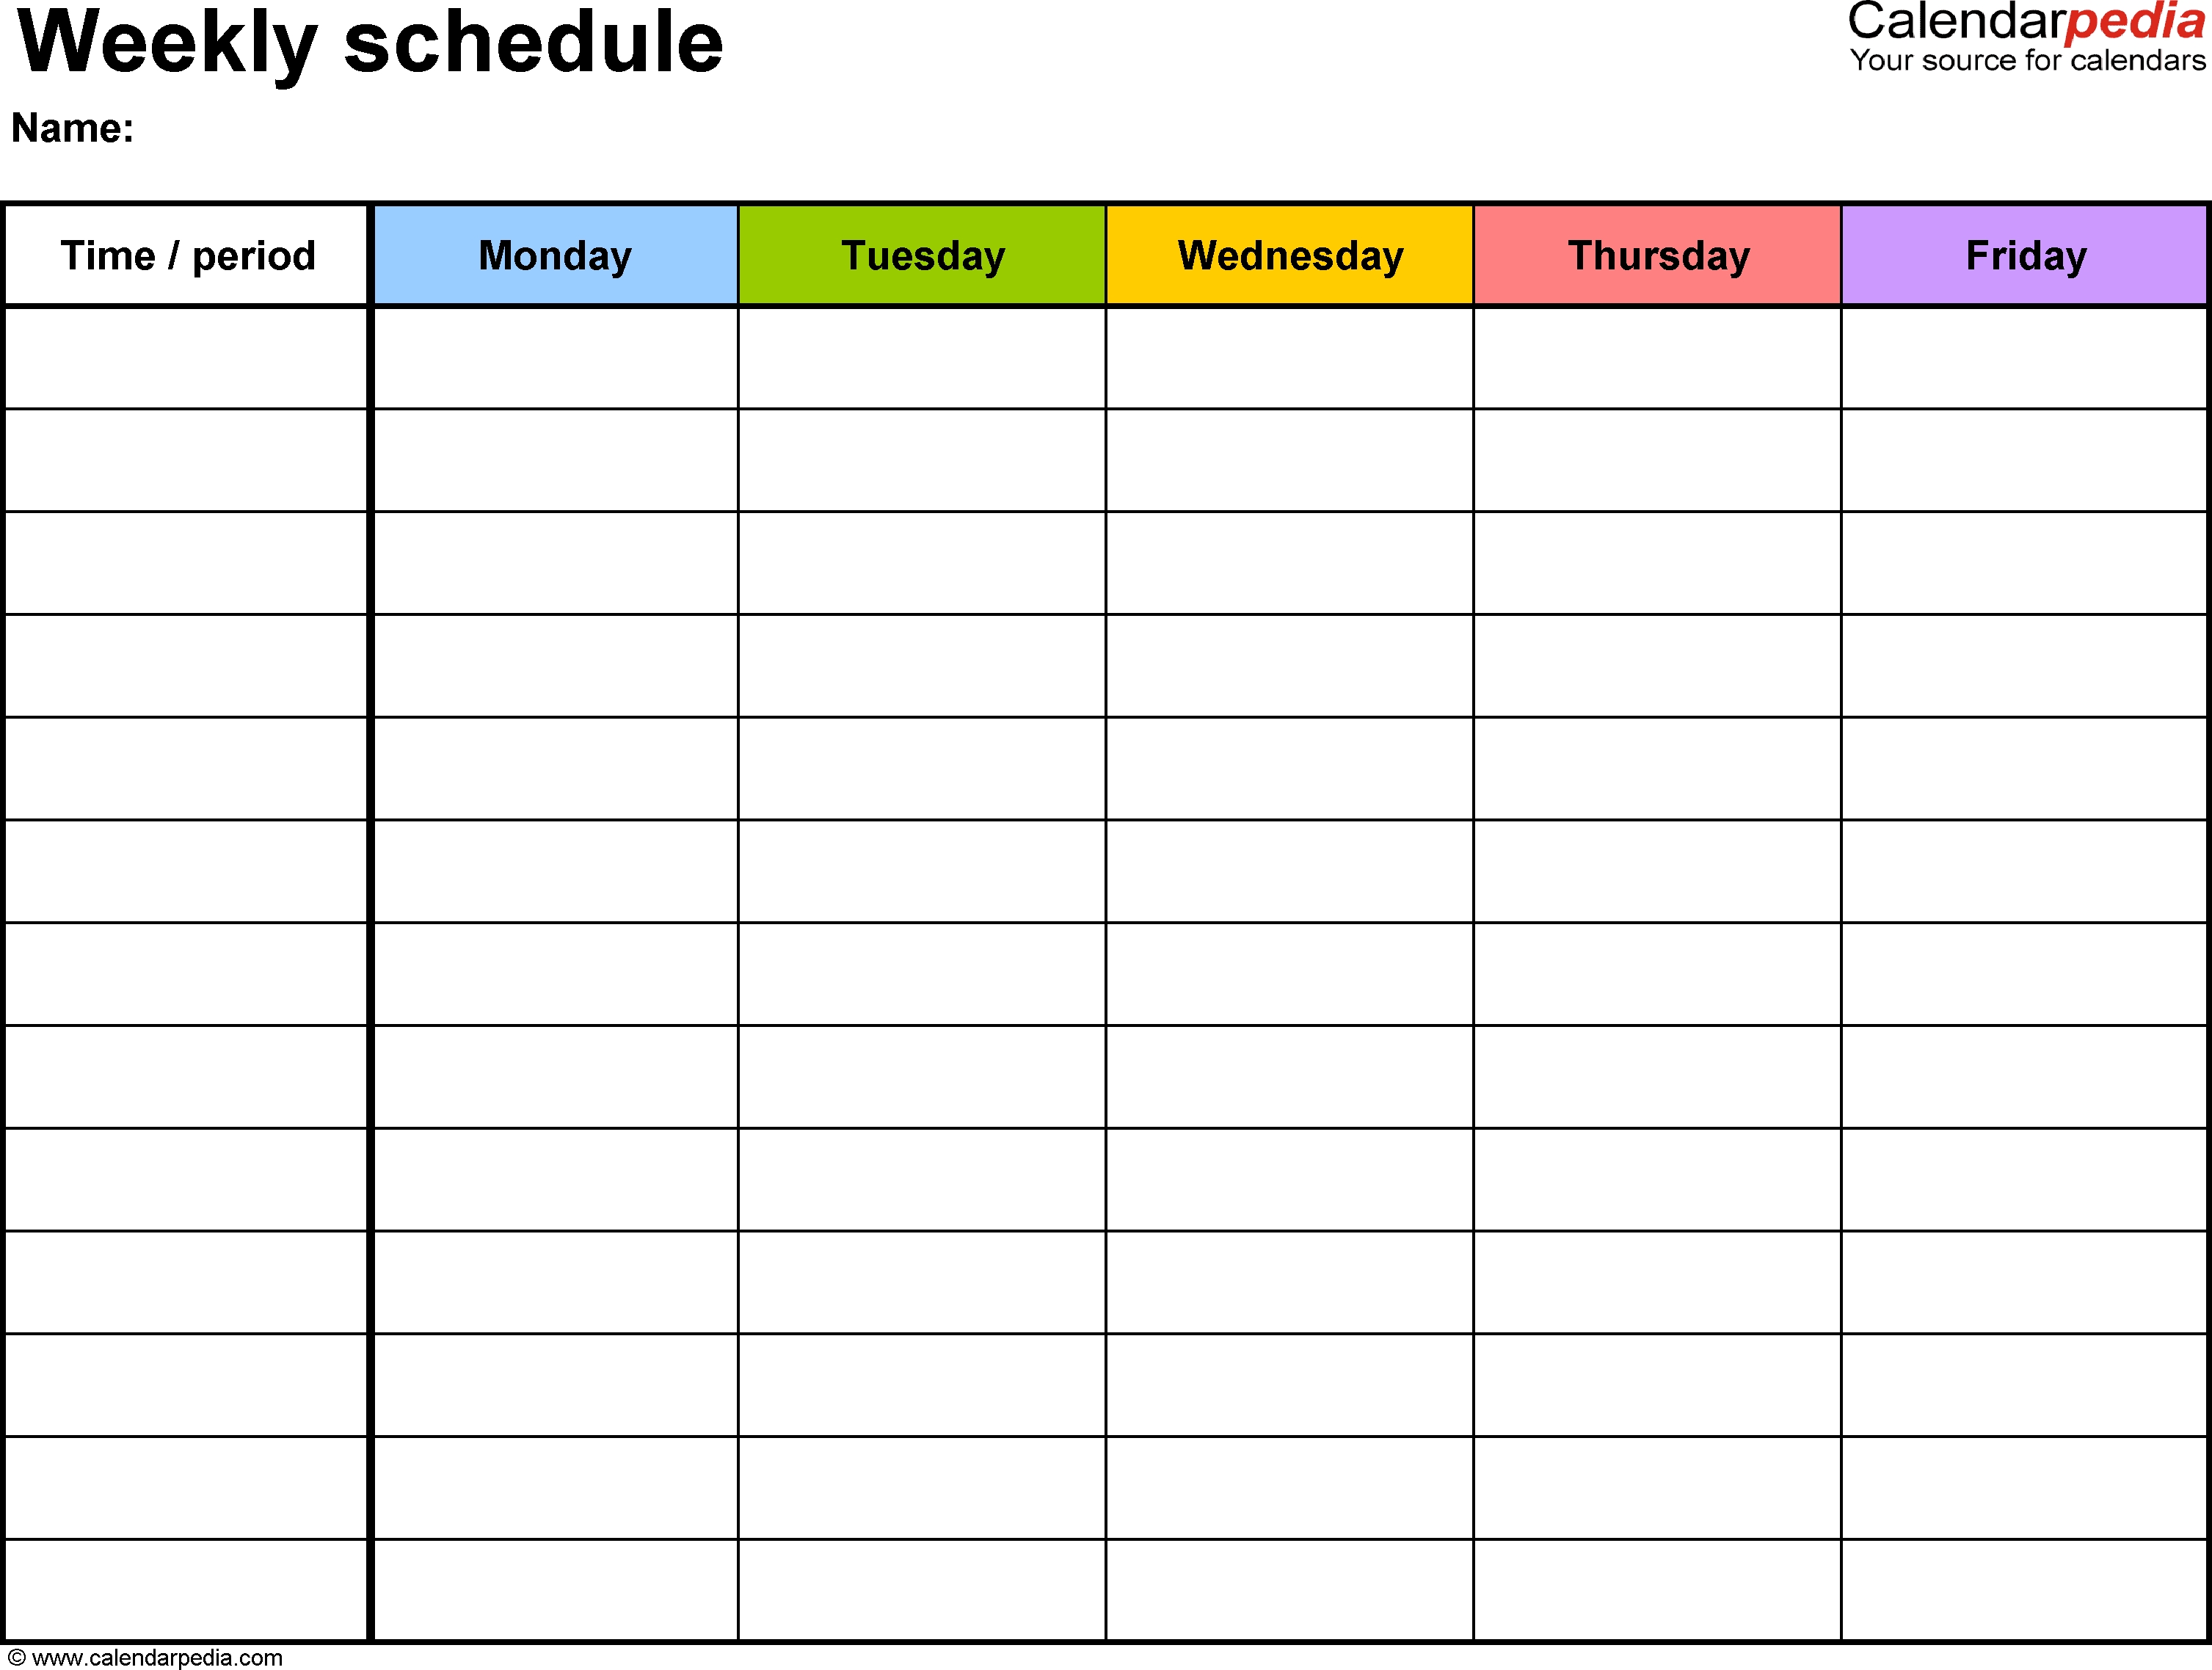 Free Weekly Schedule Templates For Word - 18 Templates in Monday Through Friday Schedule Printable